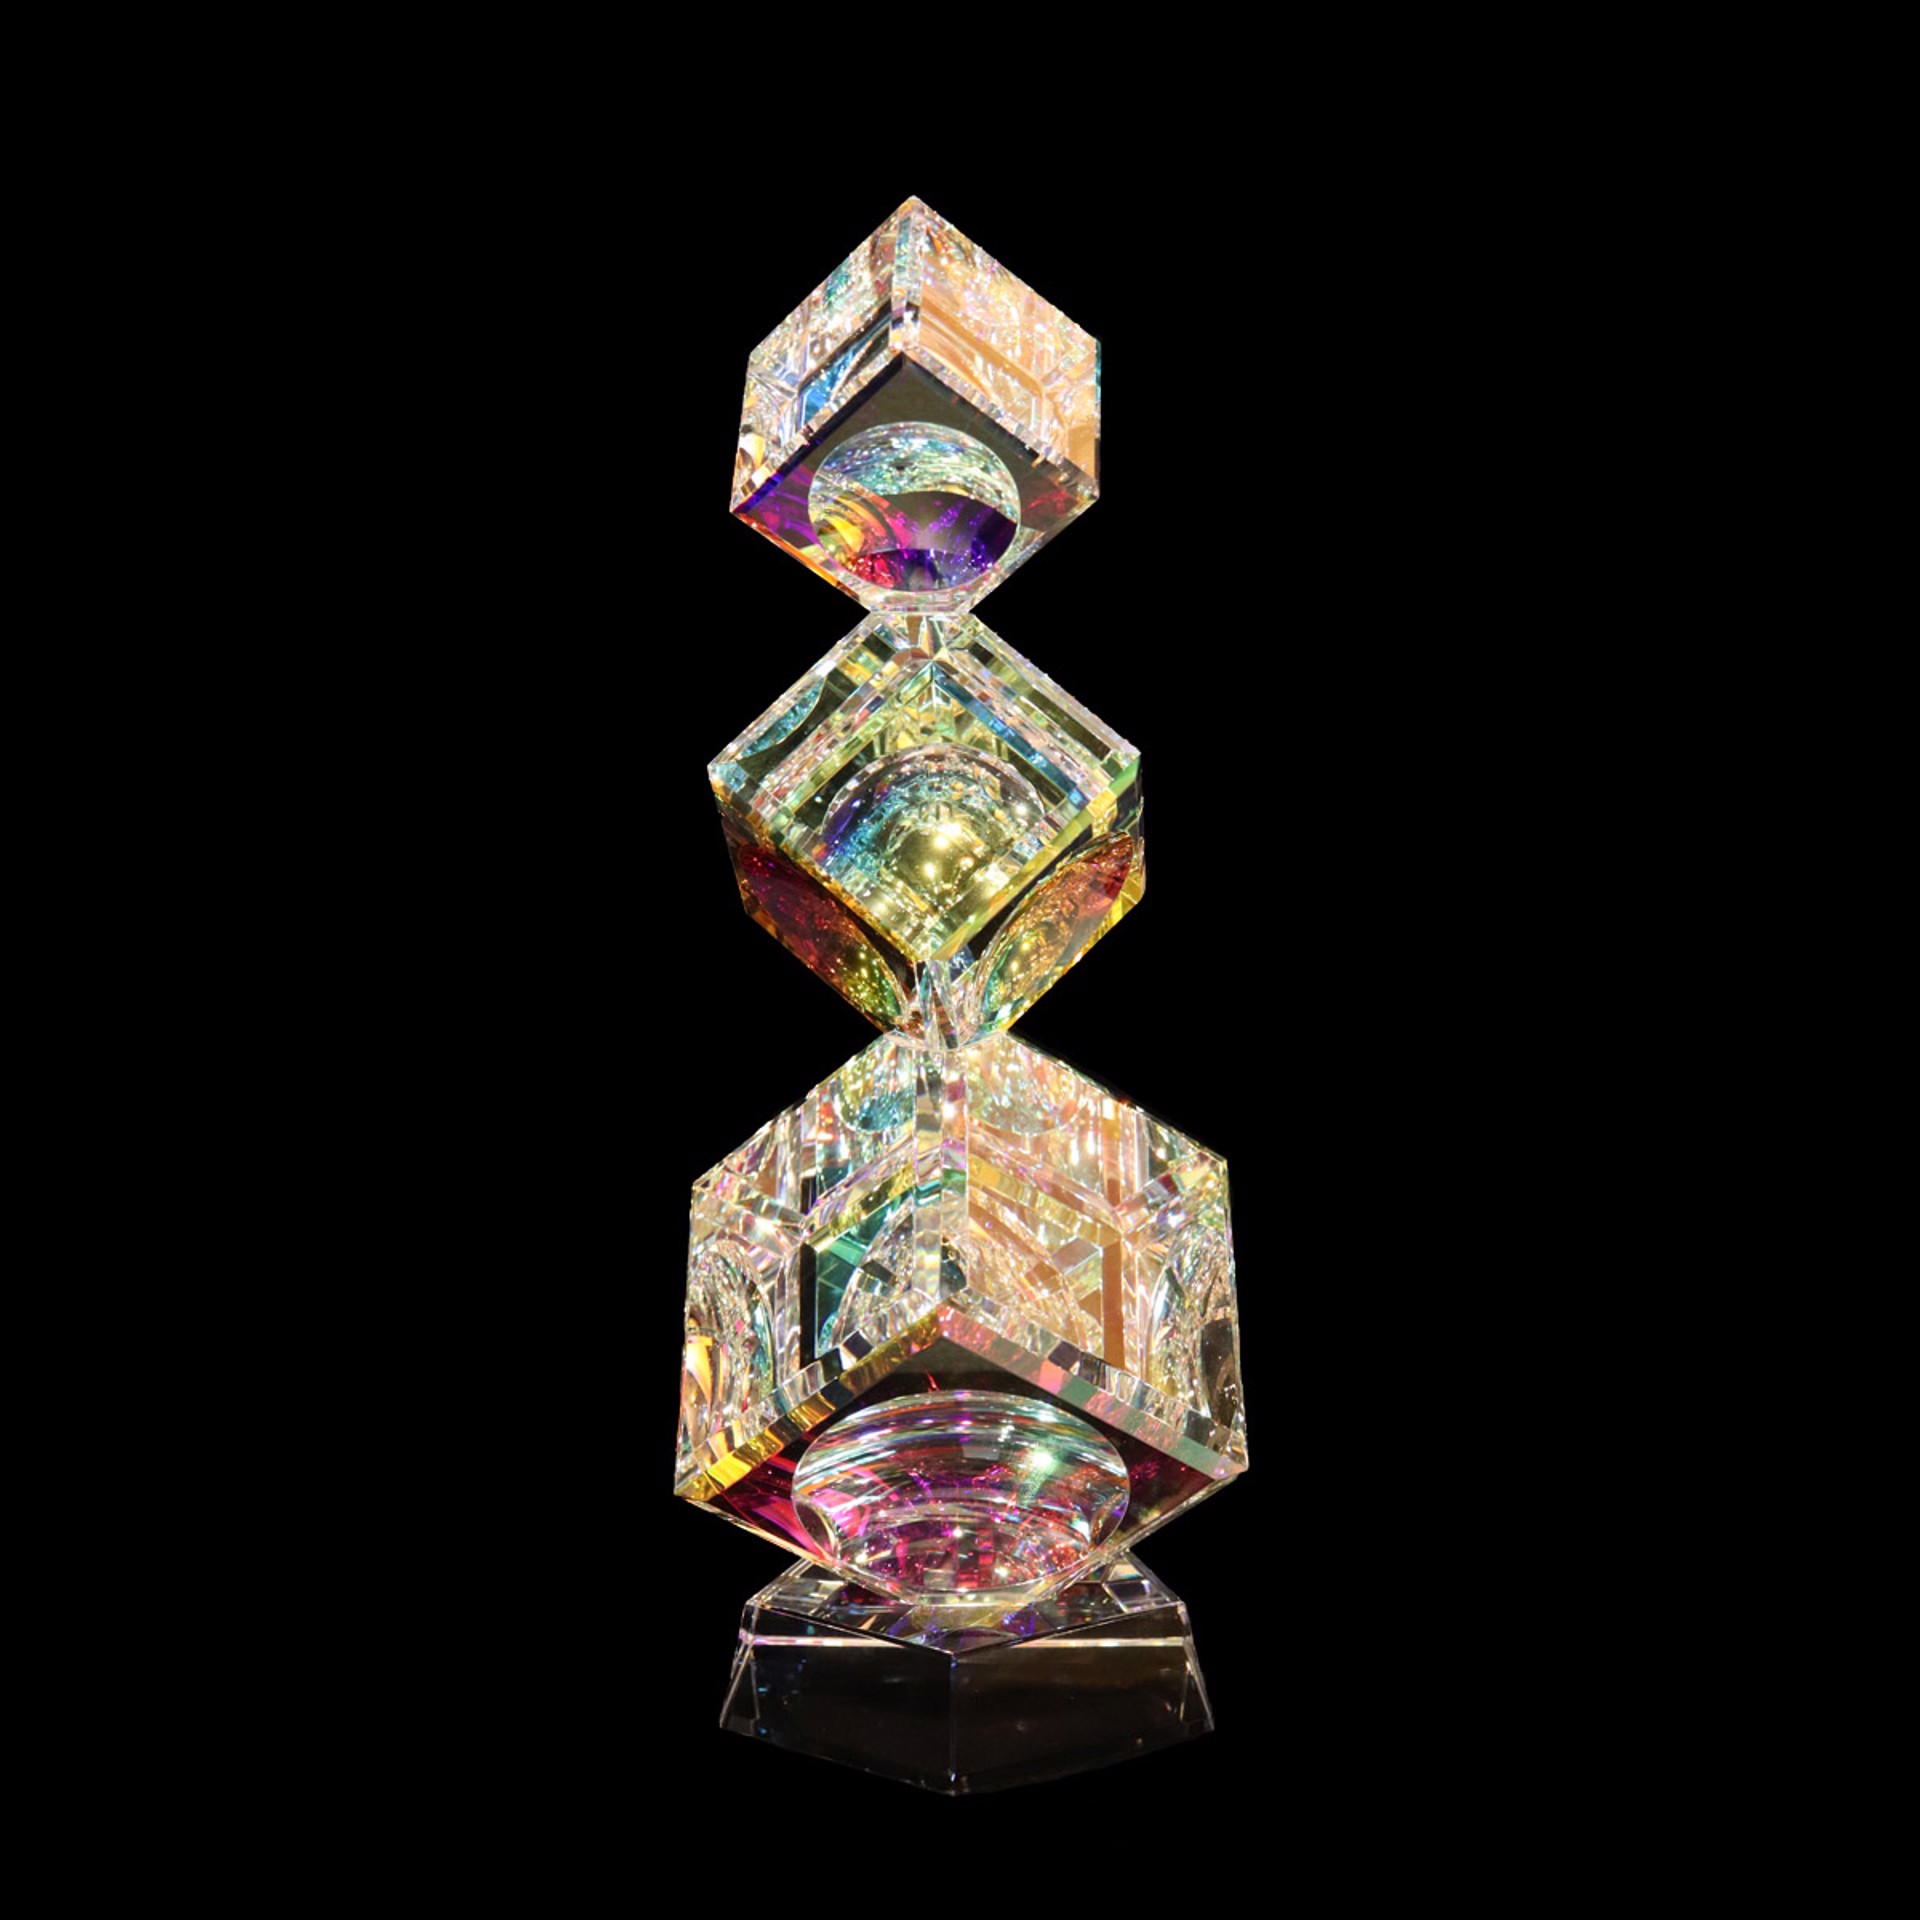 NFS-Crystal Cubes Tumbling (3) 70/80/100mm on Base by Harold Lustig